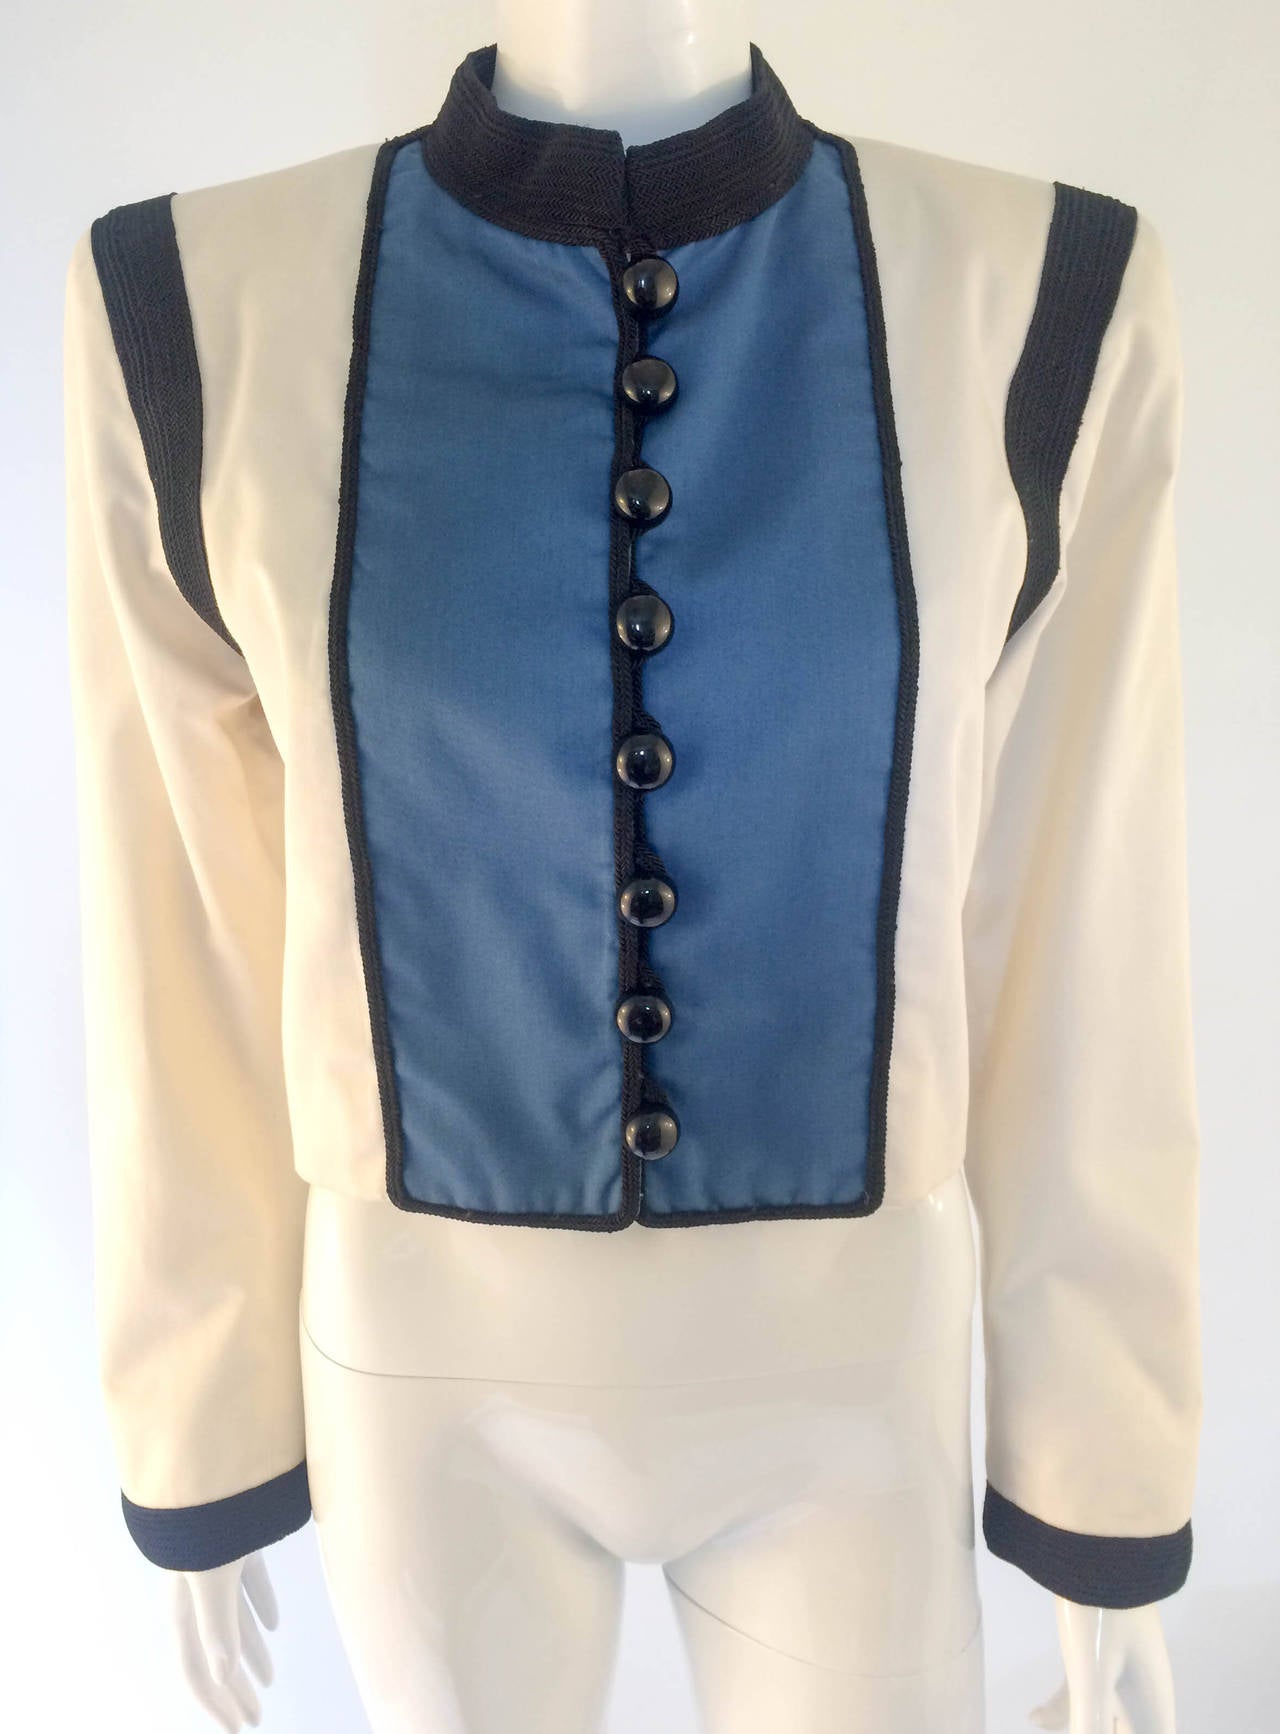 Iconic Yves Saint Lauren Rive Gauche Jacket. Bell boy inspired jacket, with front panelling and embellished with black cord-like trimmings on the collar, some of the hem and cuffs. In ivory and blue. Shoulder pads. Fully lined. This is a timeless